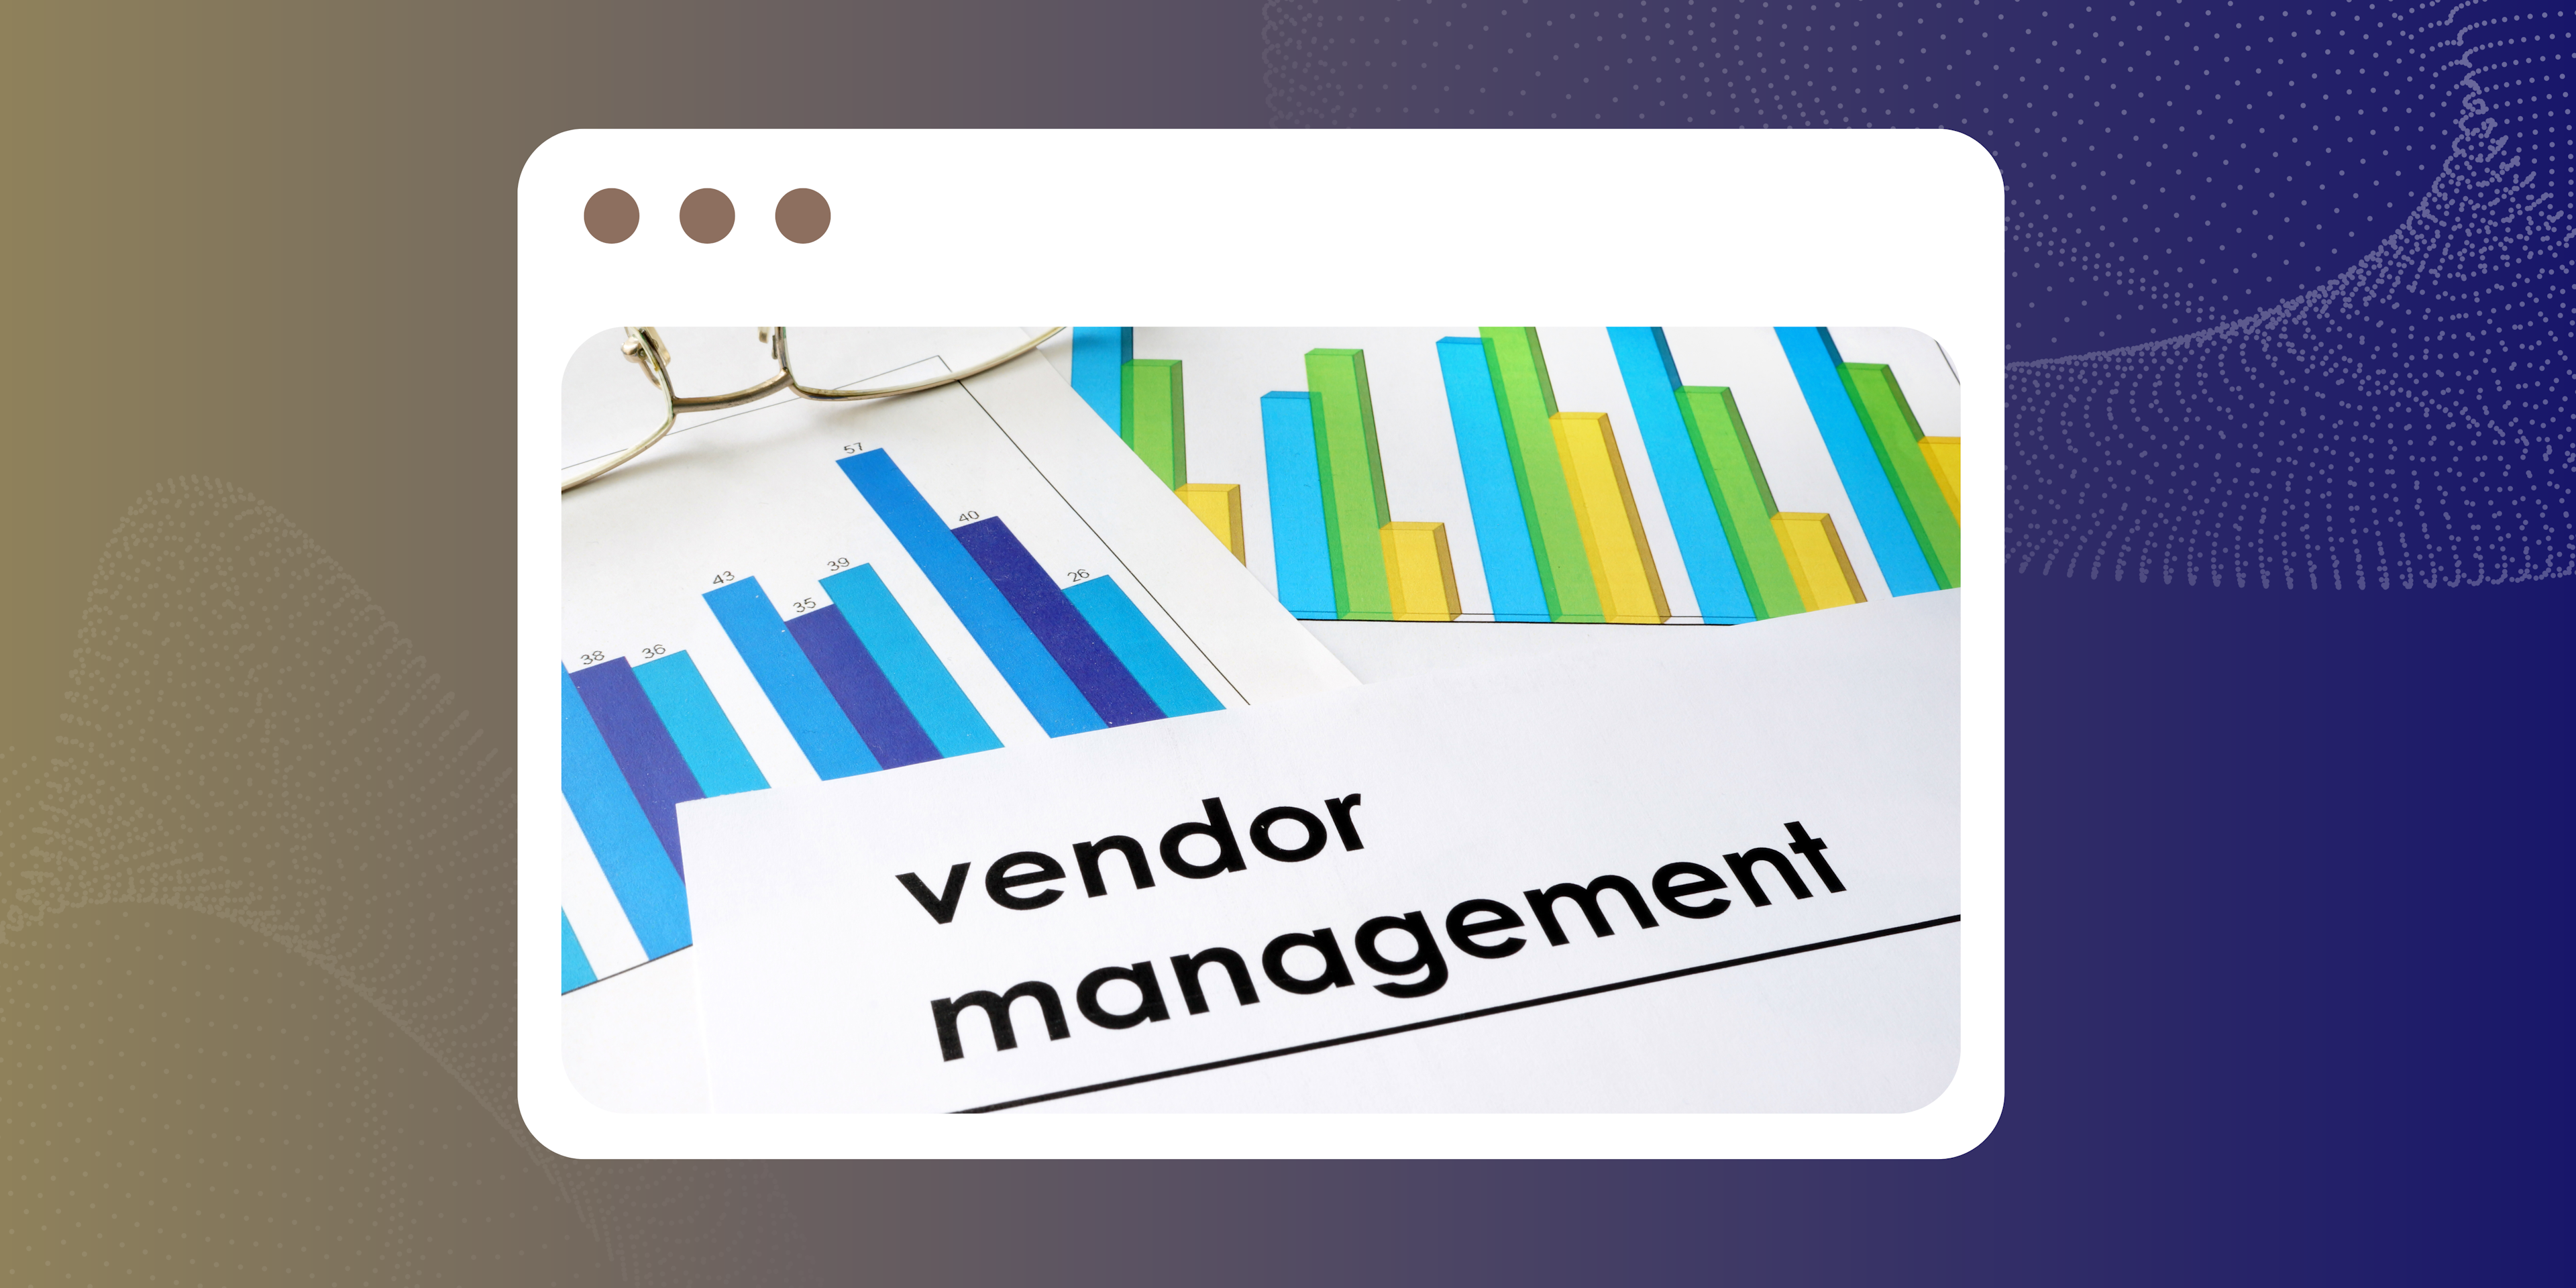 Effective Vendor Management leads to operational efficiency and business success